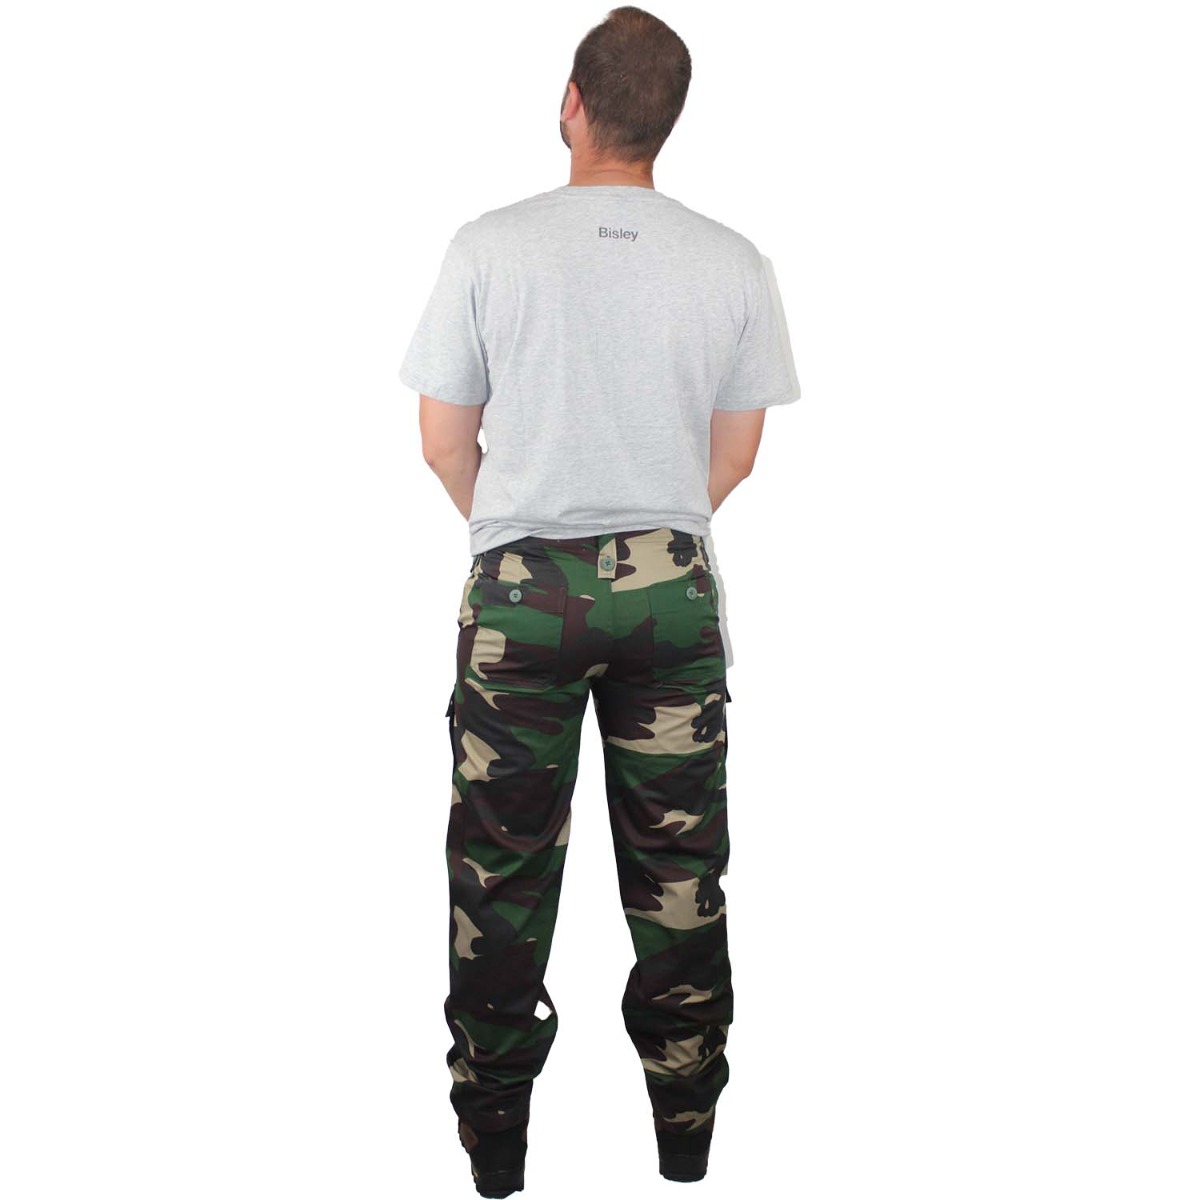 Buy Army Universe Woodland Digital Camo Military BDU Cargo Pants with Pin  (W 27-31 - I 29.5-32.5) S at Amazon.in